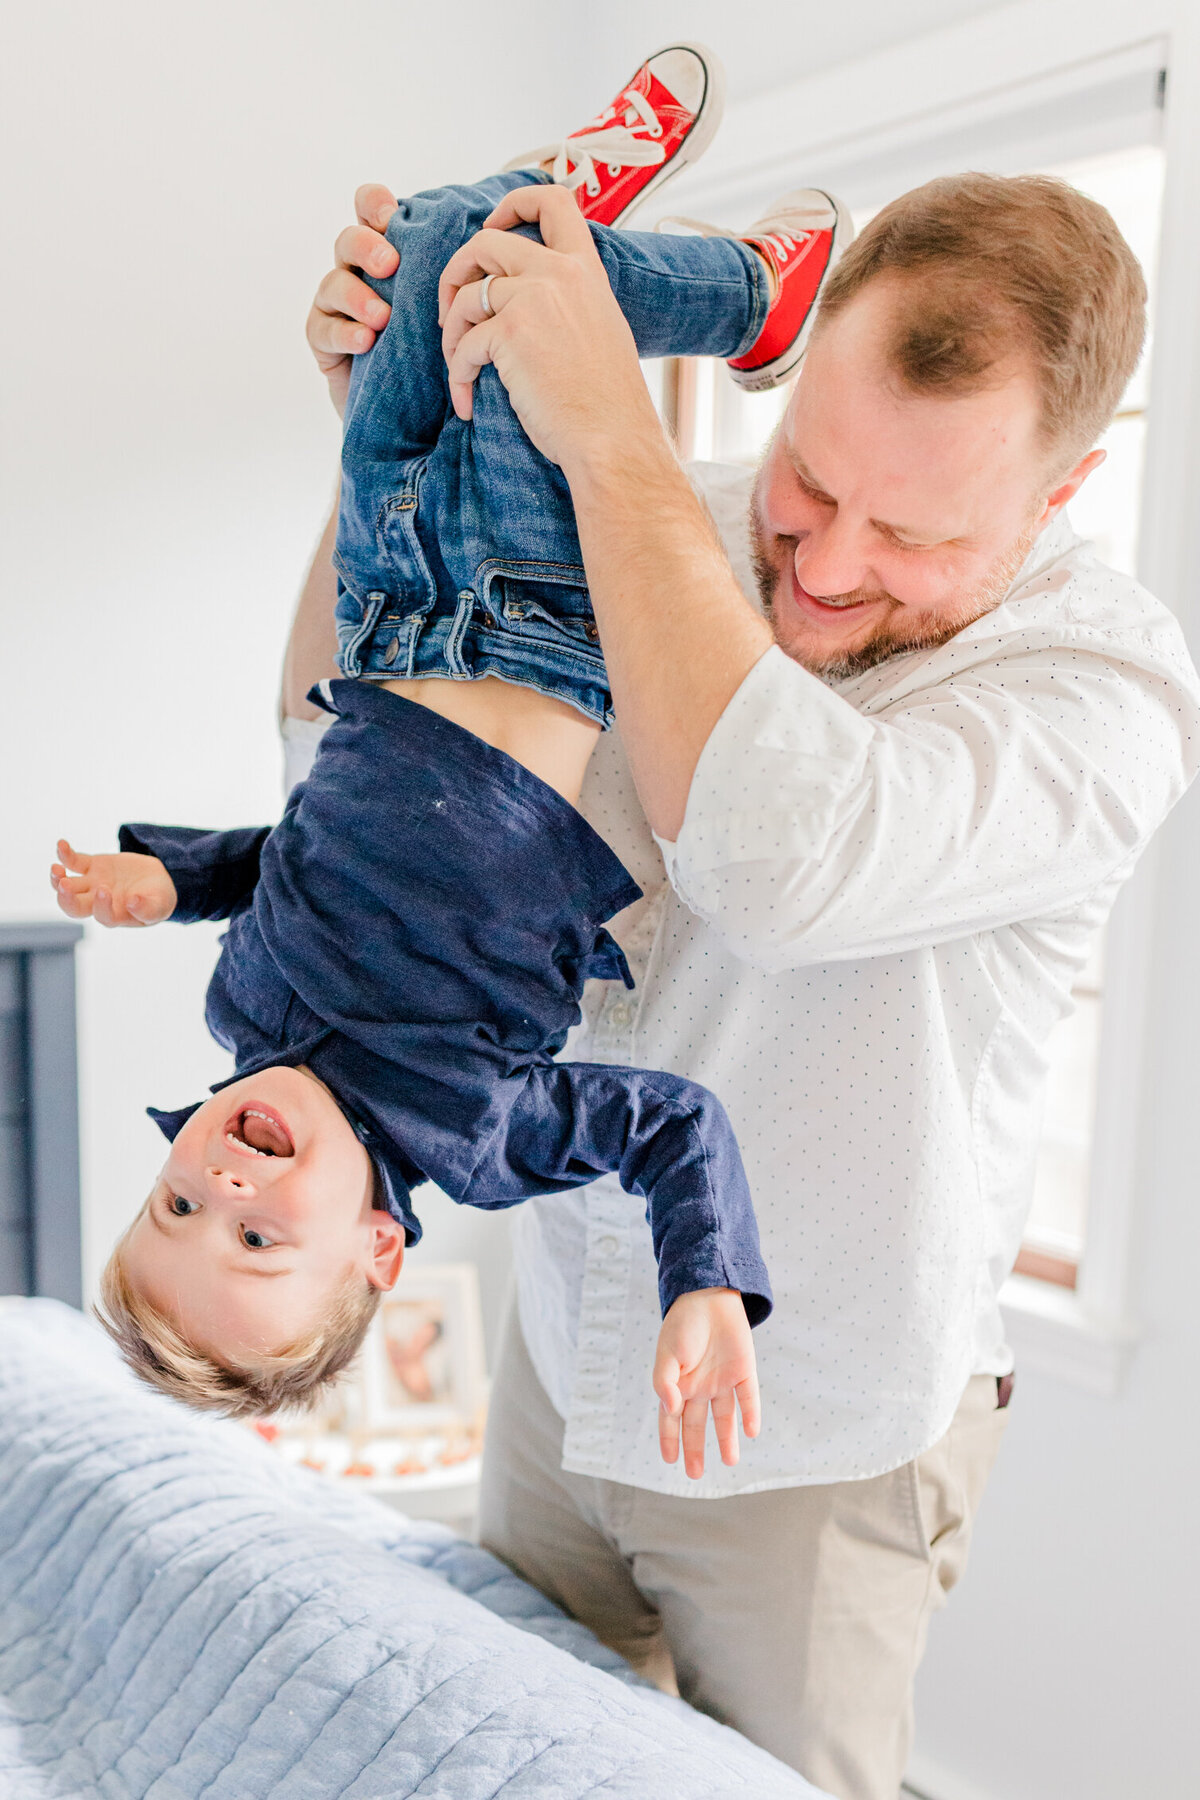 Dad in white shirt holds laughing toddler in blue shirt upside-down